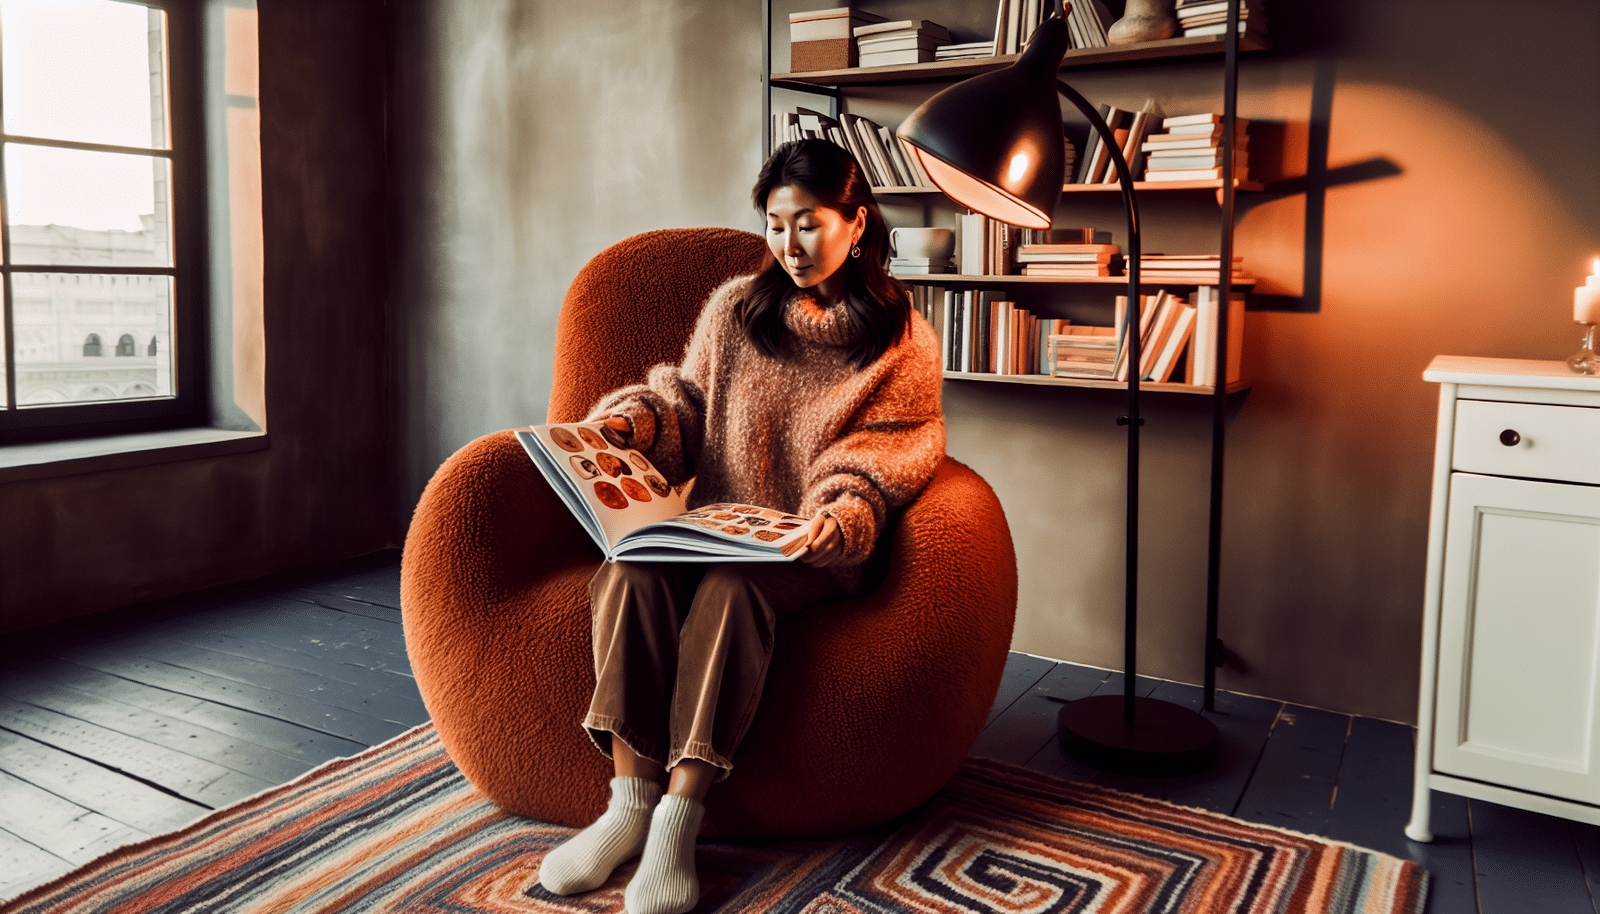 A person browsing through a freeze-drying cookbook in a cozy reading nook